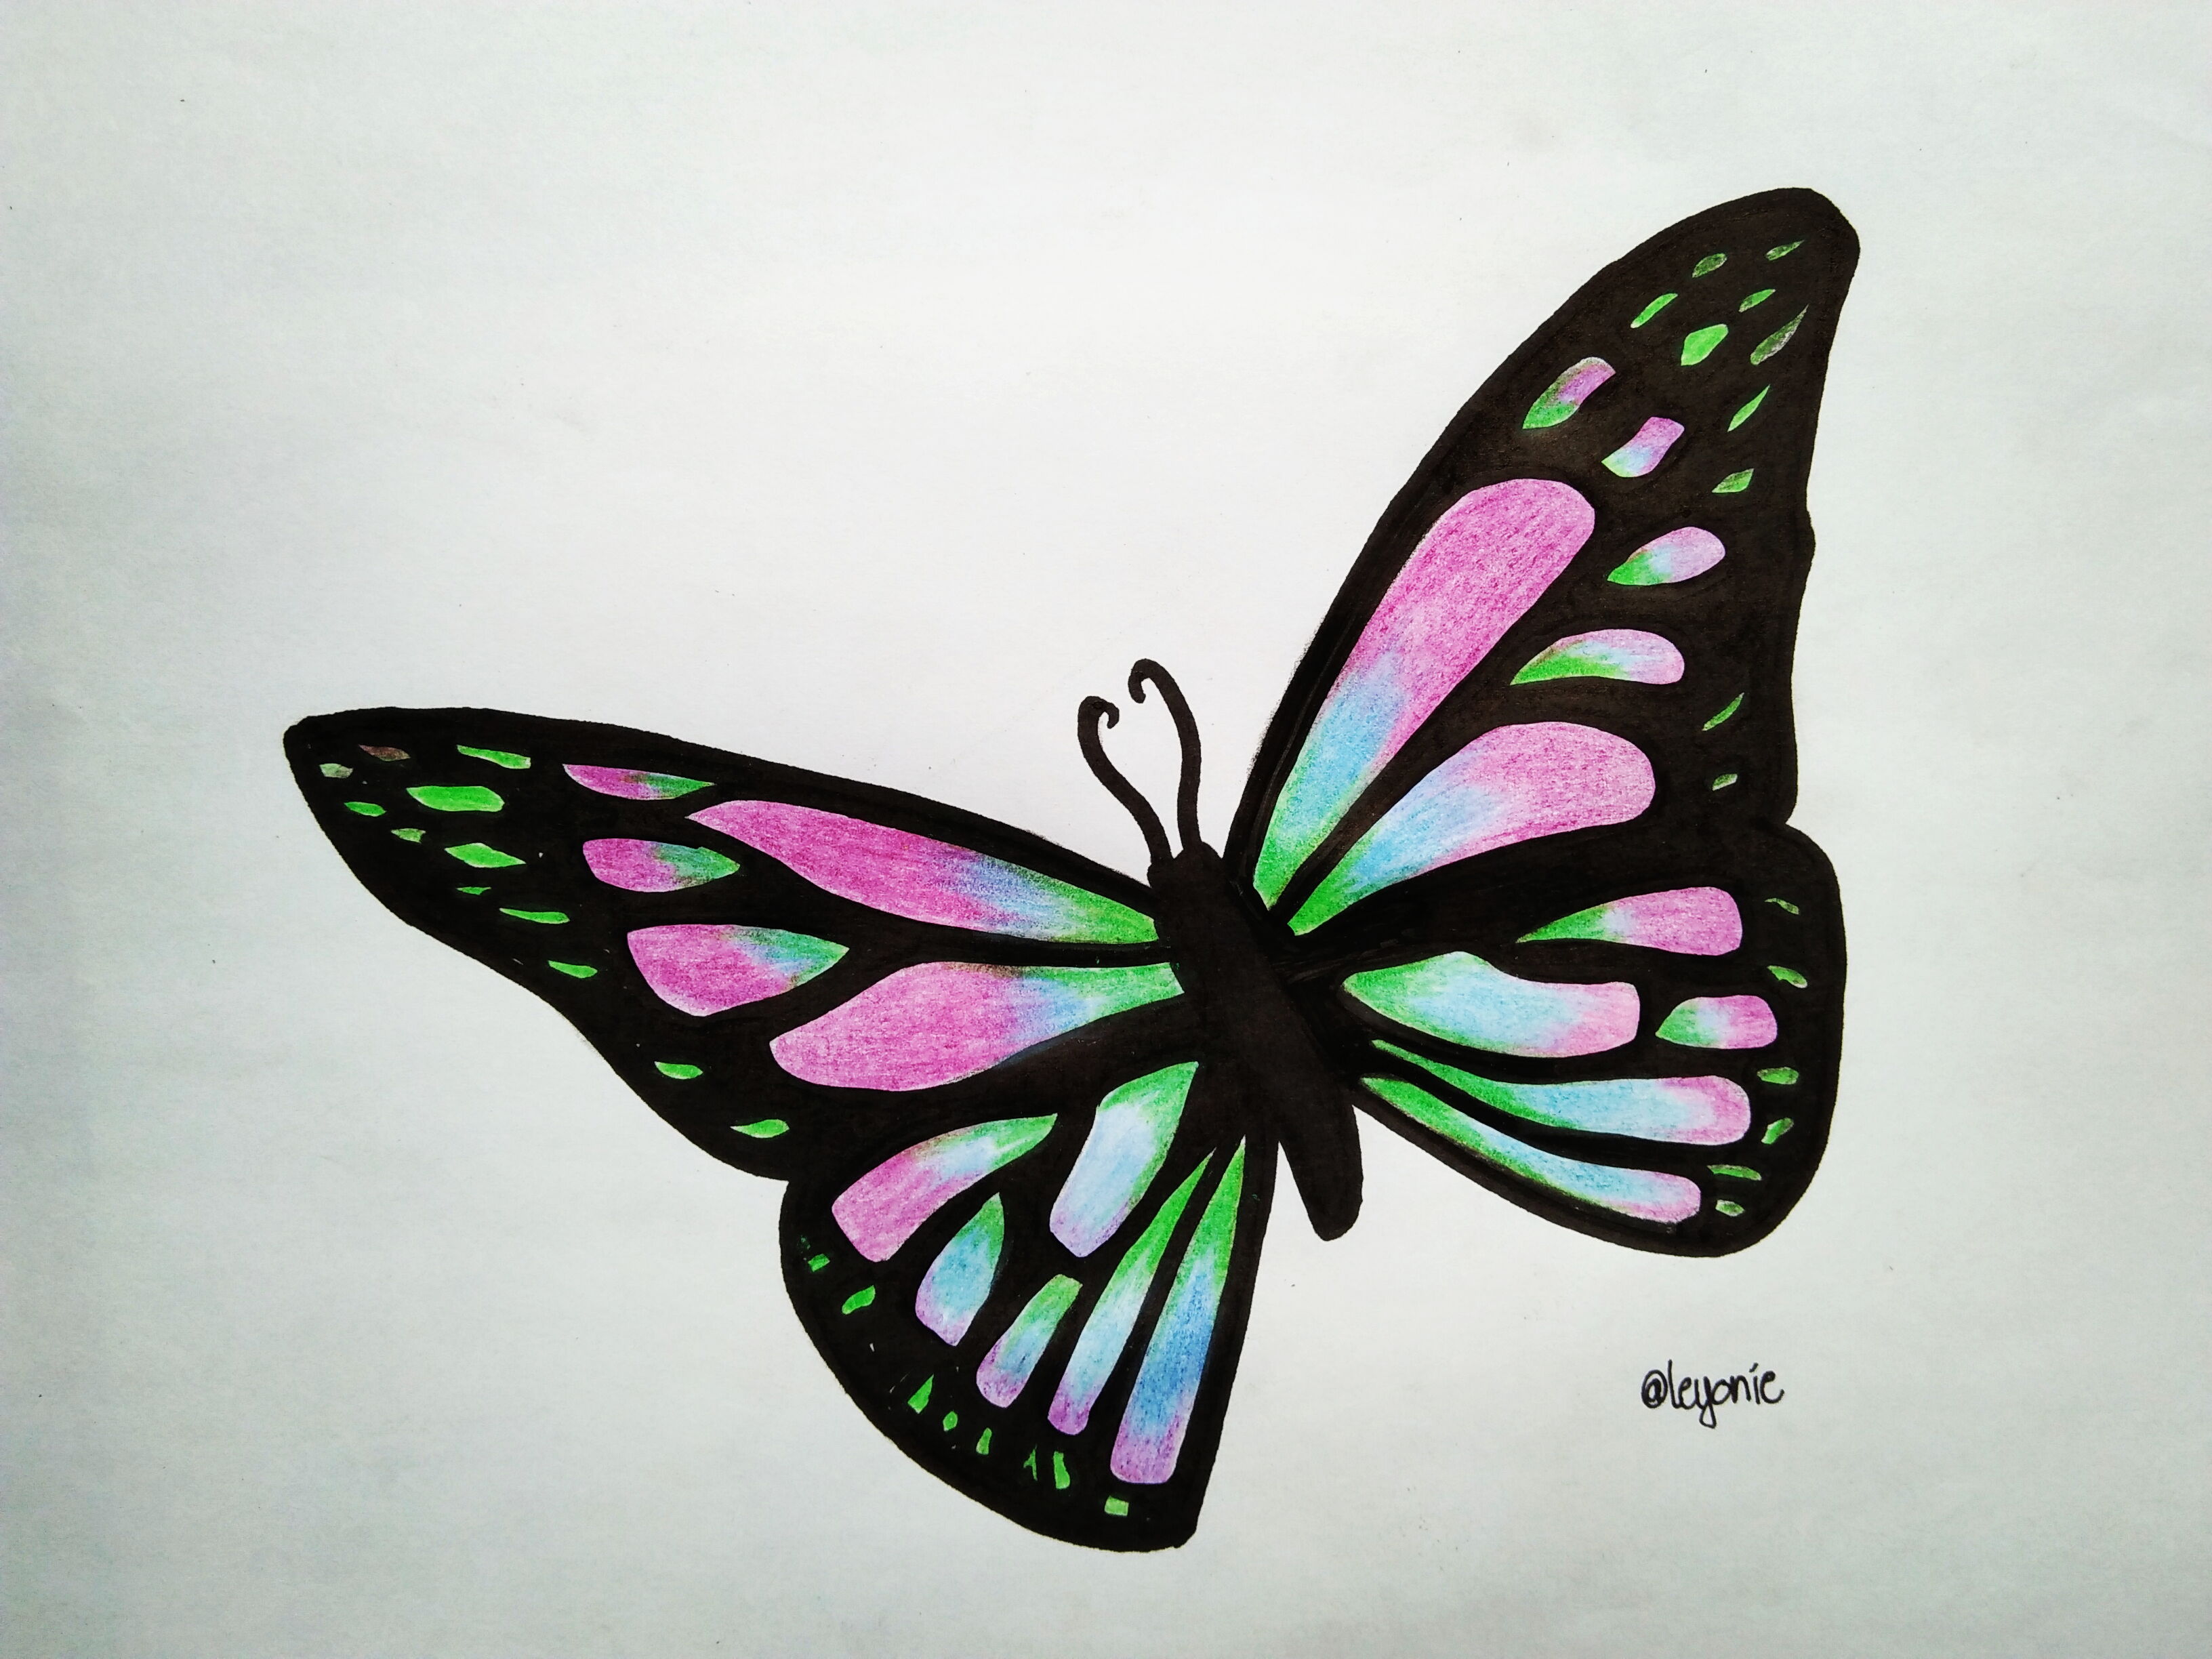 Easy Pencil Drawing Of Beautiful Butterflies | Pencil drawings, Pencil drawings  easy, Butterfly drawing